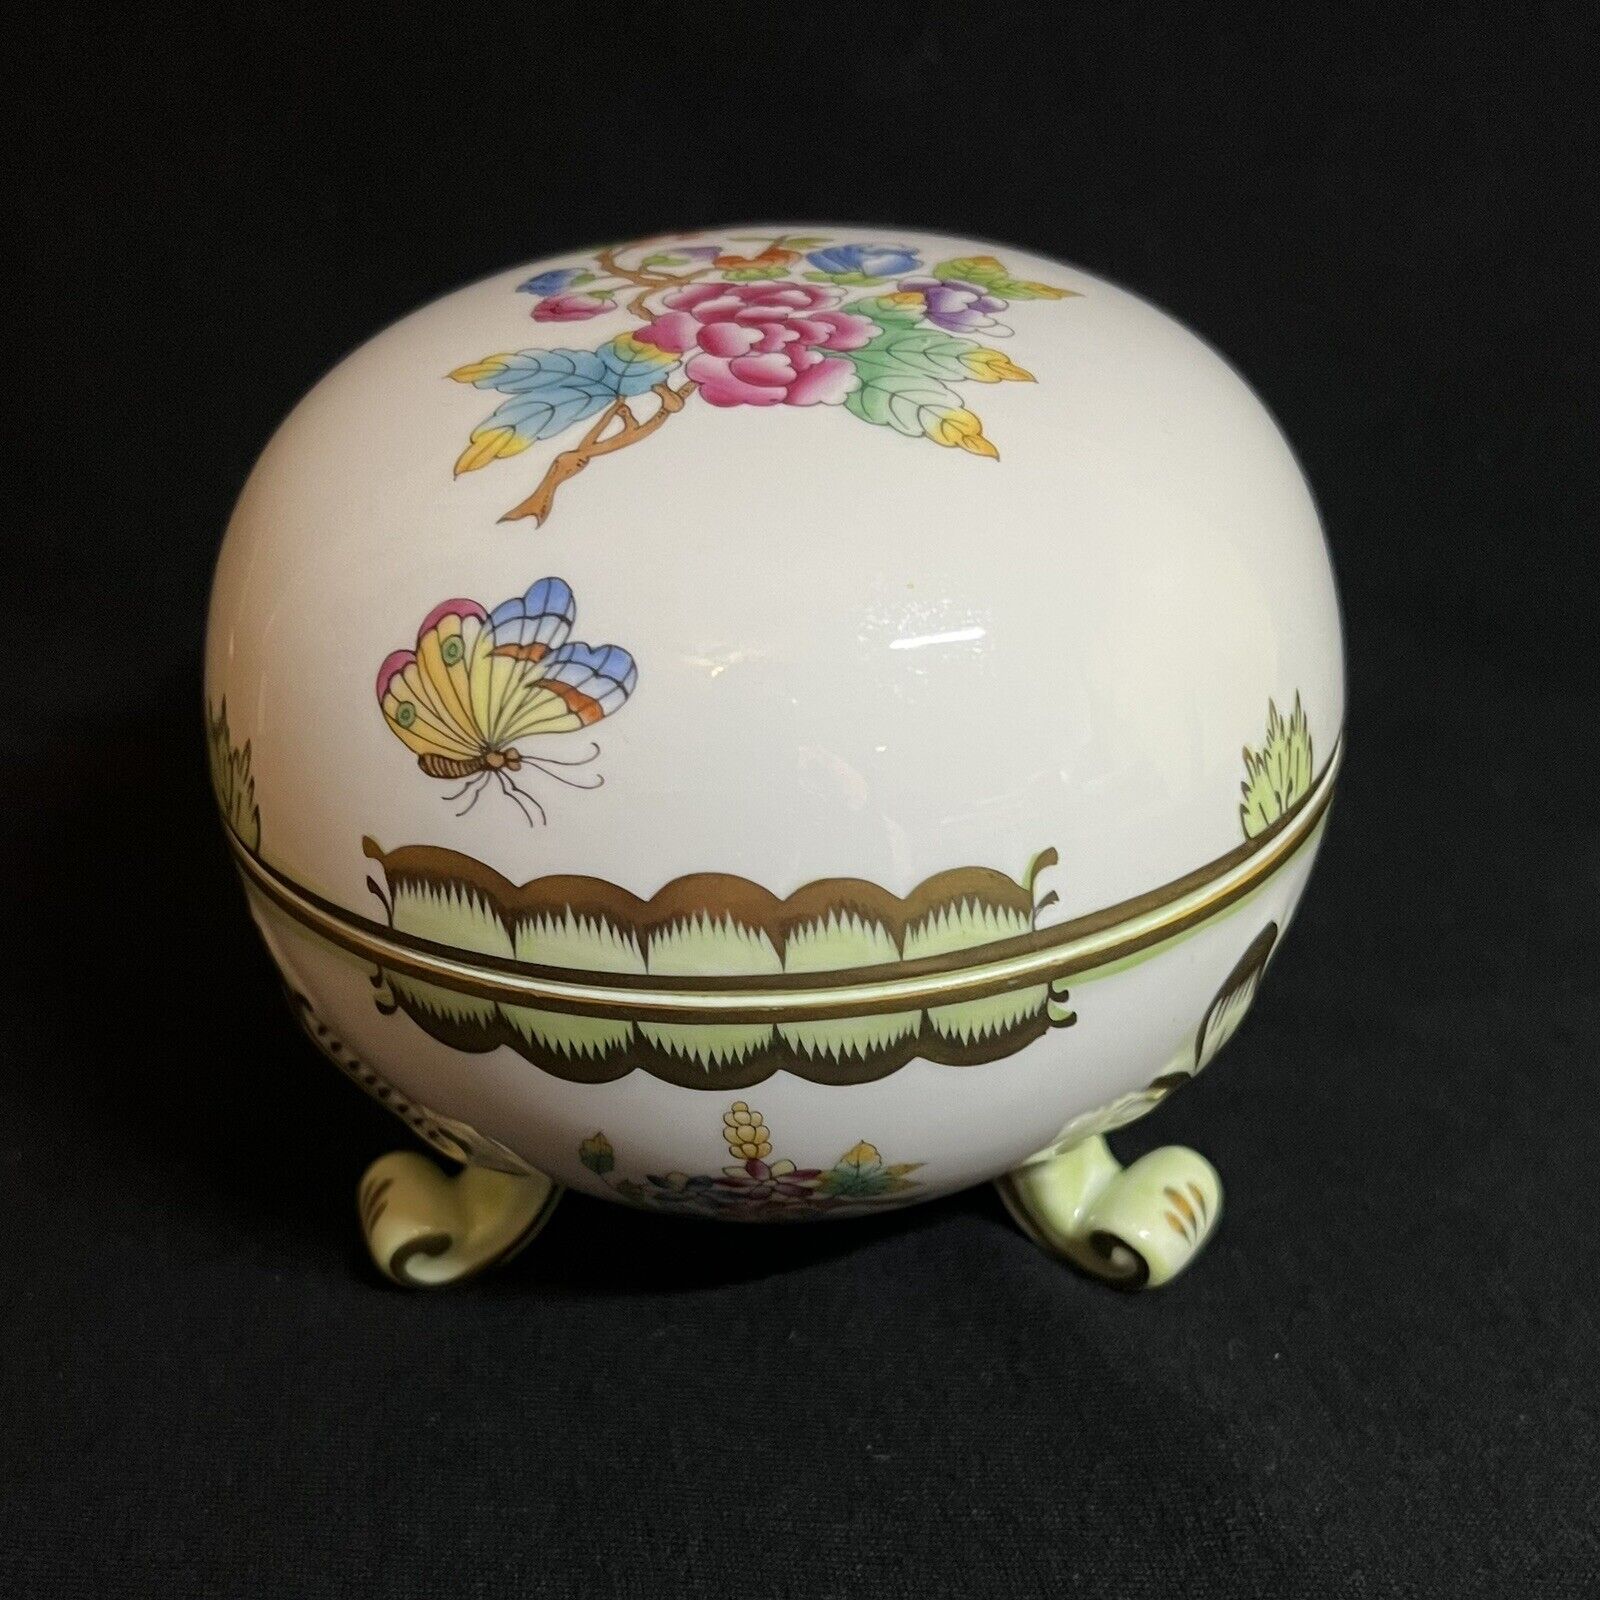 Herend Hvngary Hand painted Gilded Trinket Jewelry Box G1811VBO #22.